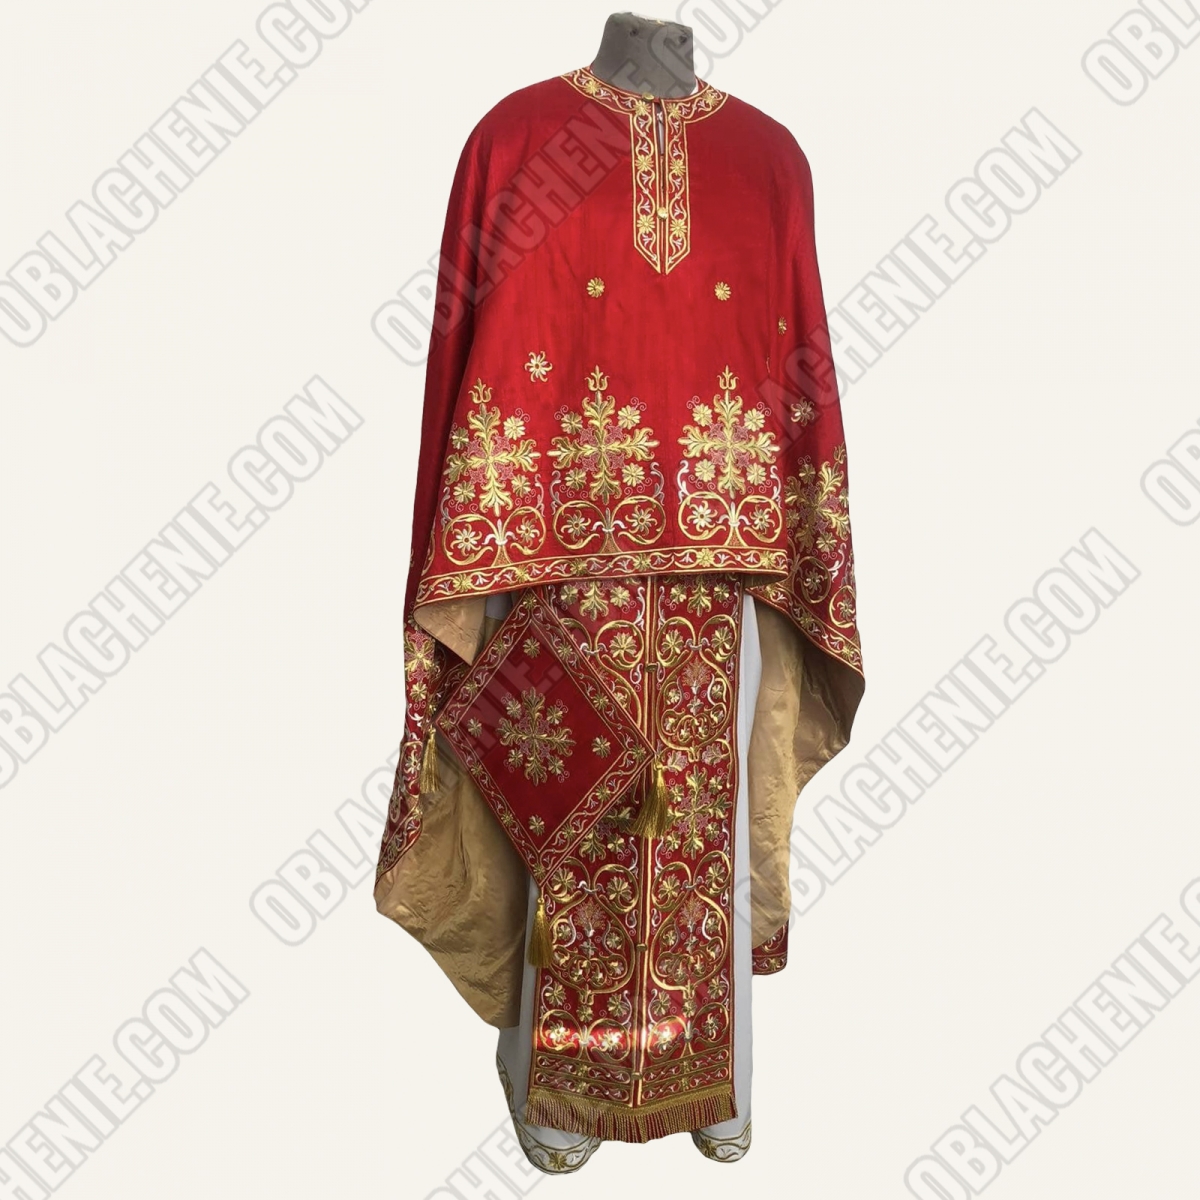 EMBROIDERED PRIEST'S VESTMENTS 12037